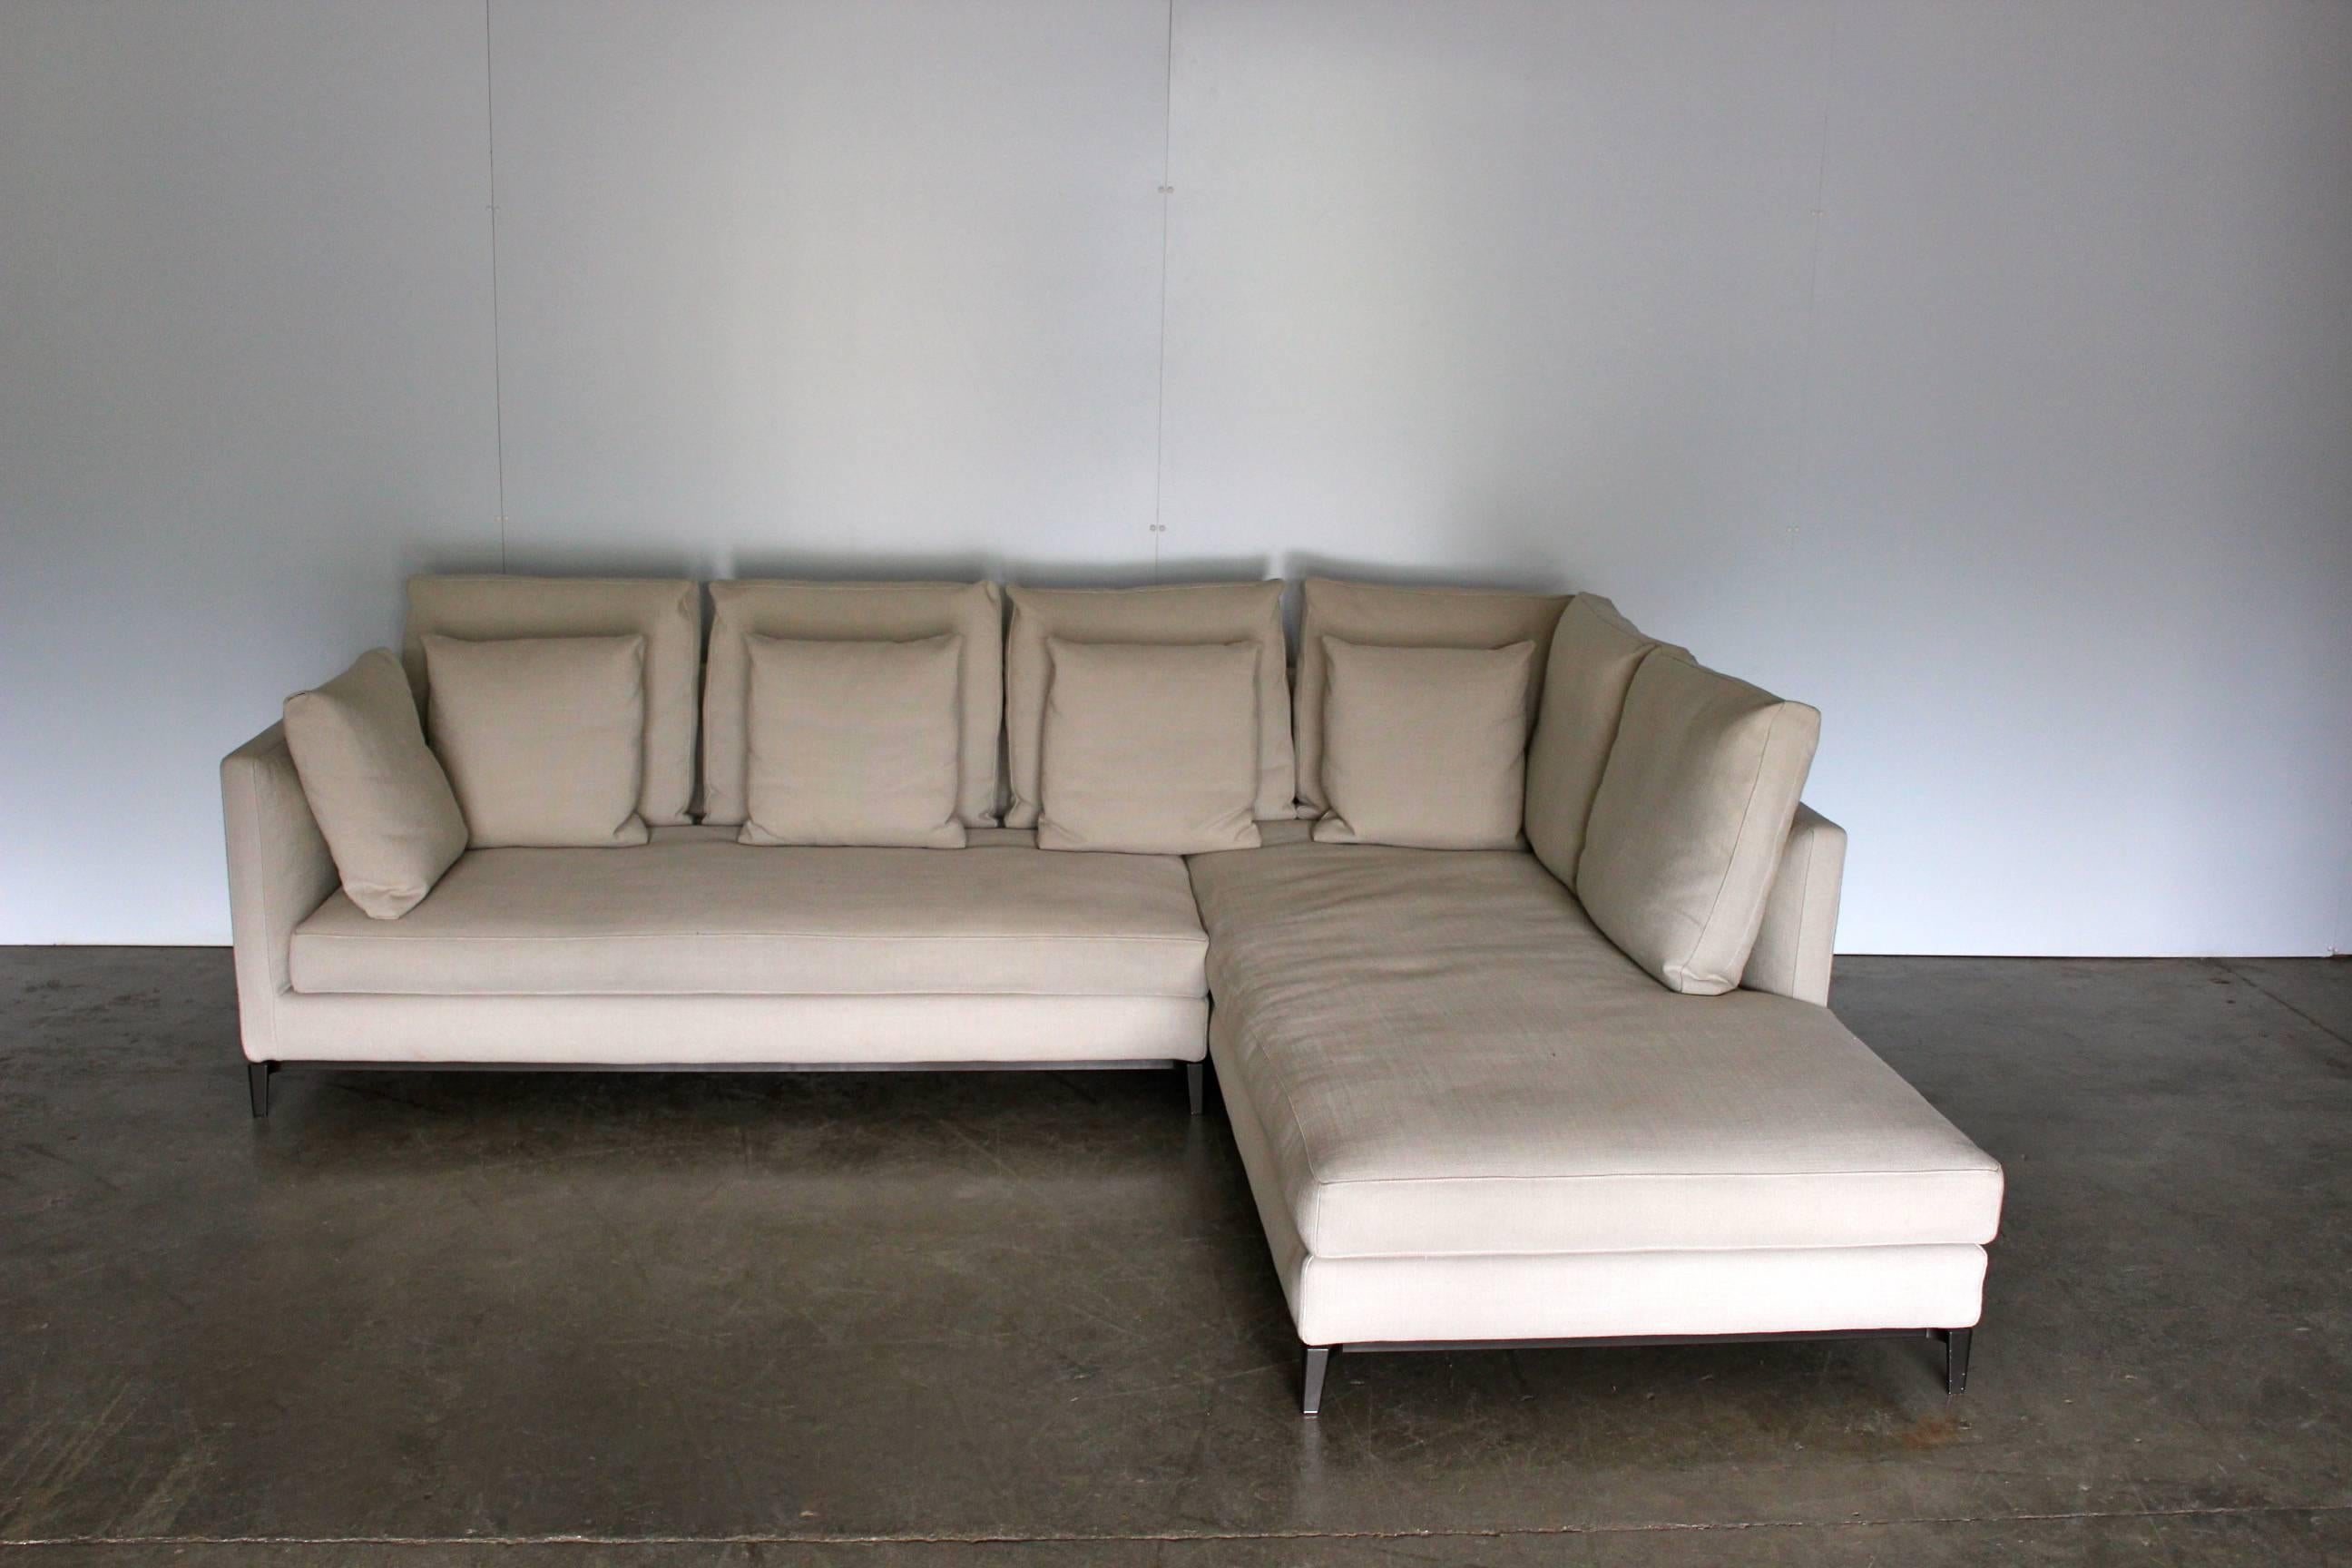 On offer on this occasion is a superb, Minotti “Andersen Slim 103 Quilt” four-seat L-shape sofa, dressed in a peerless, top-grade “Paco” linen-cotton mix fabric in “Sabbia”, and with pewter-metal base and legs.

As you will no doubt be aware by